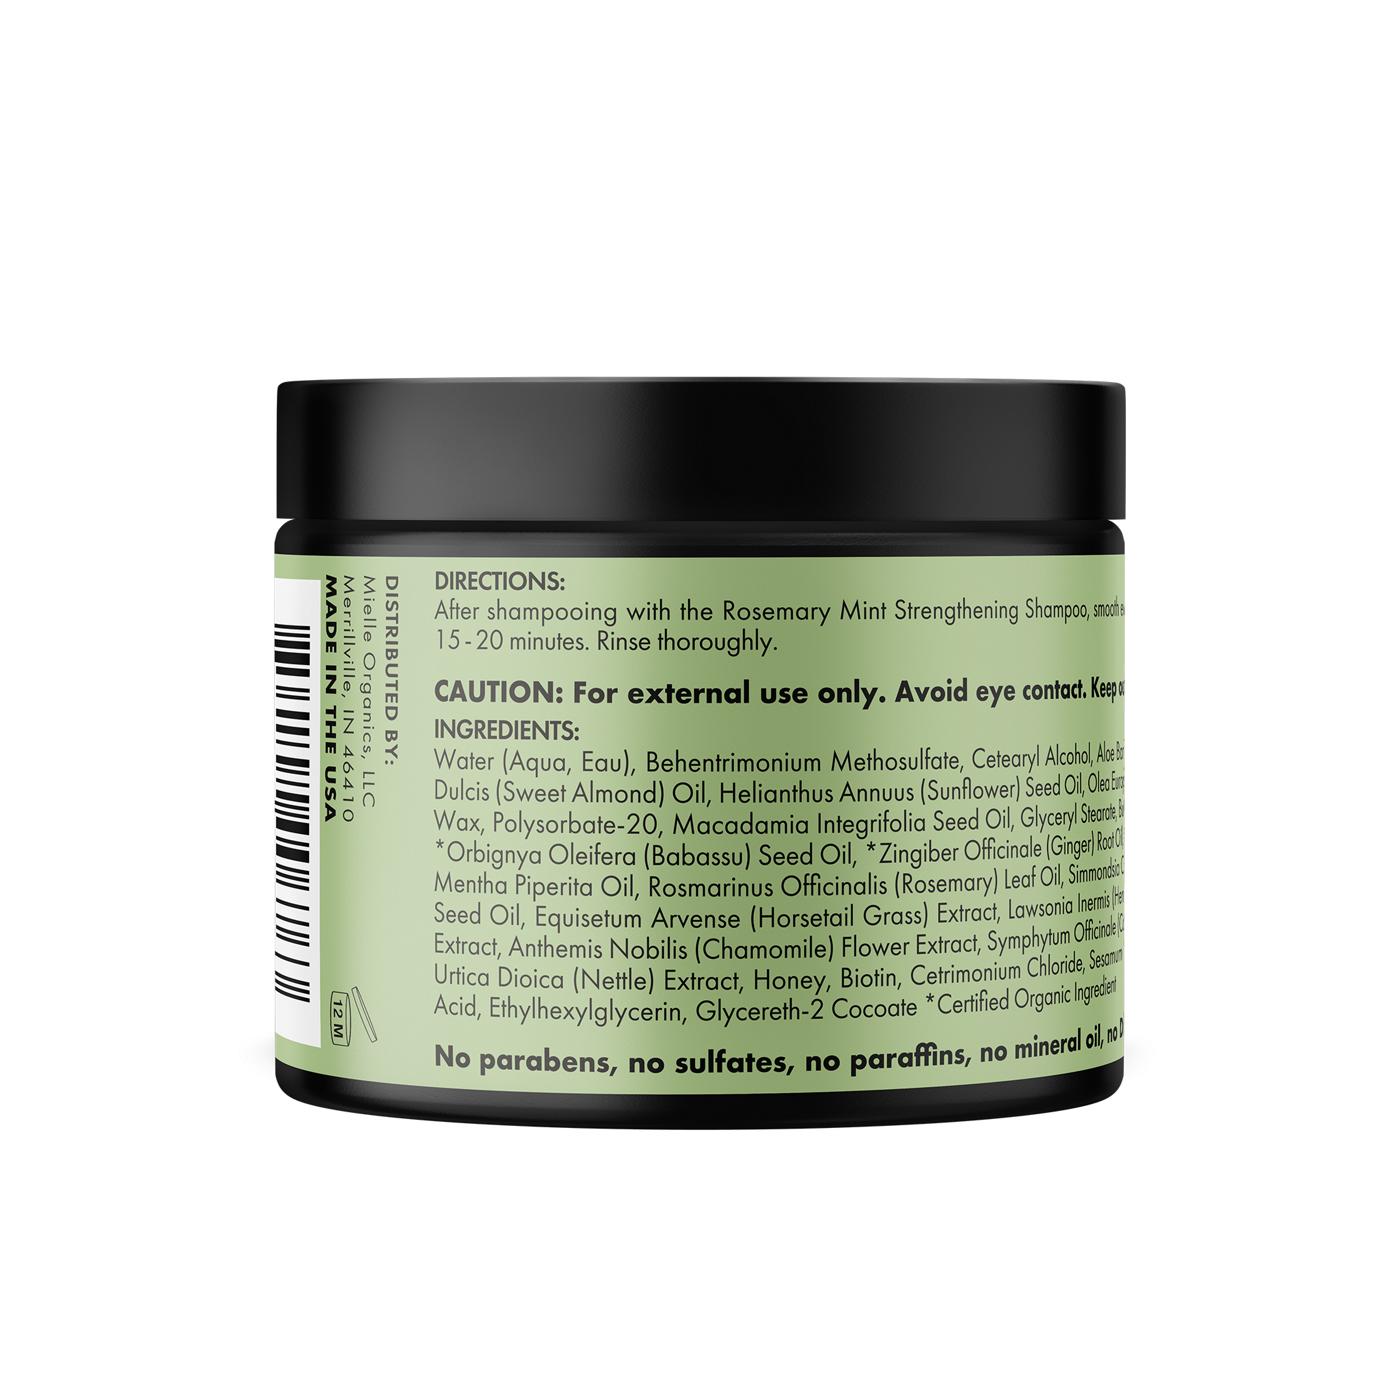 Mielle Hair Masque - Rosemary Mint; image 3 of 3